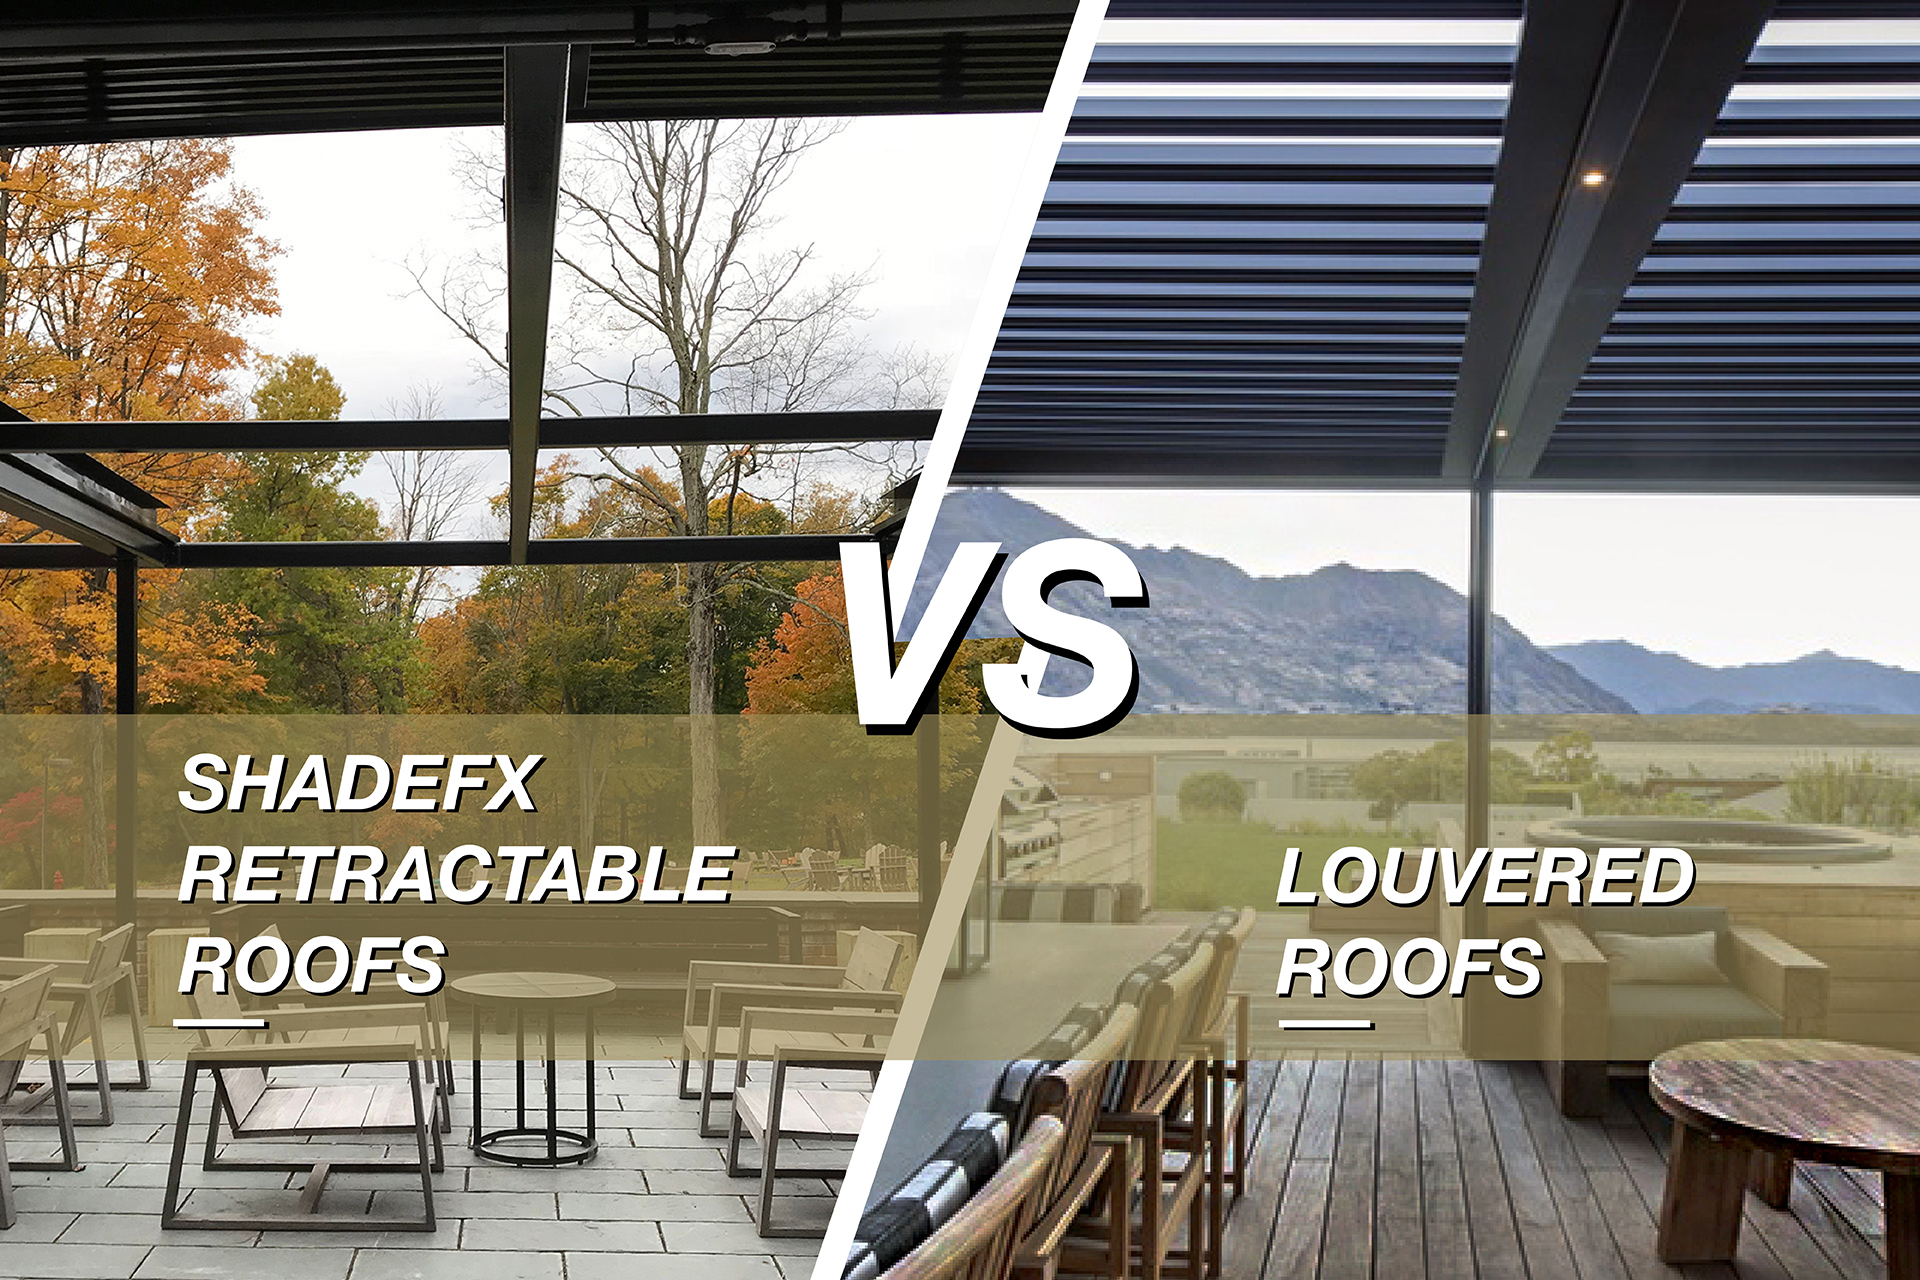 Shadefx retractable roof